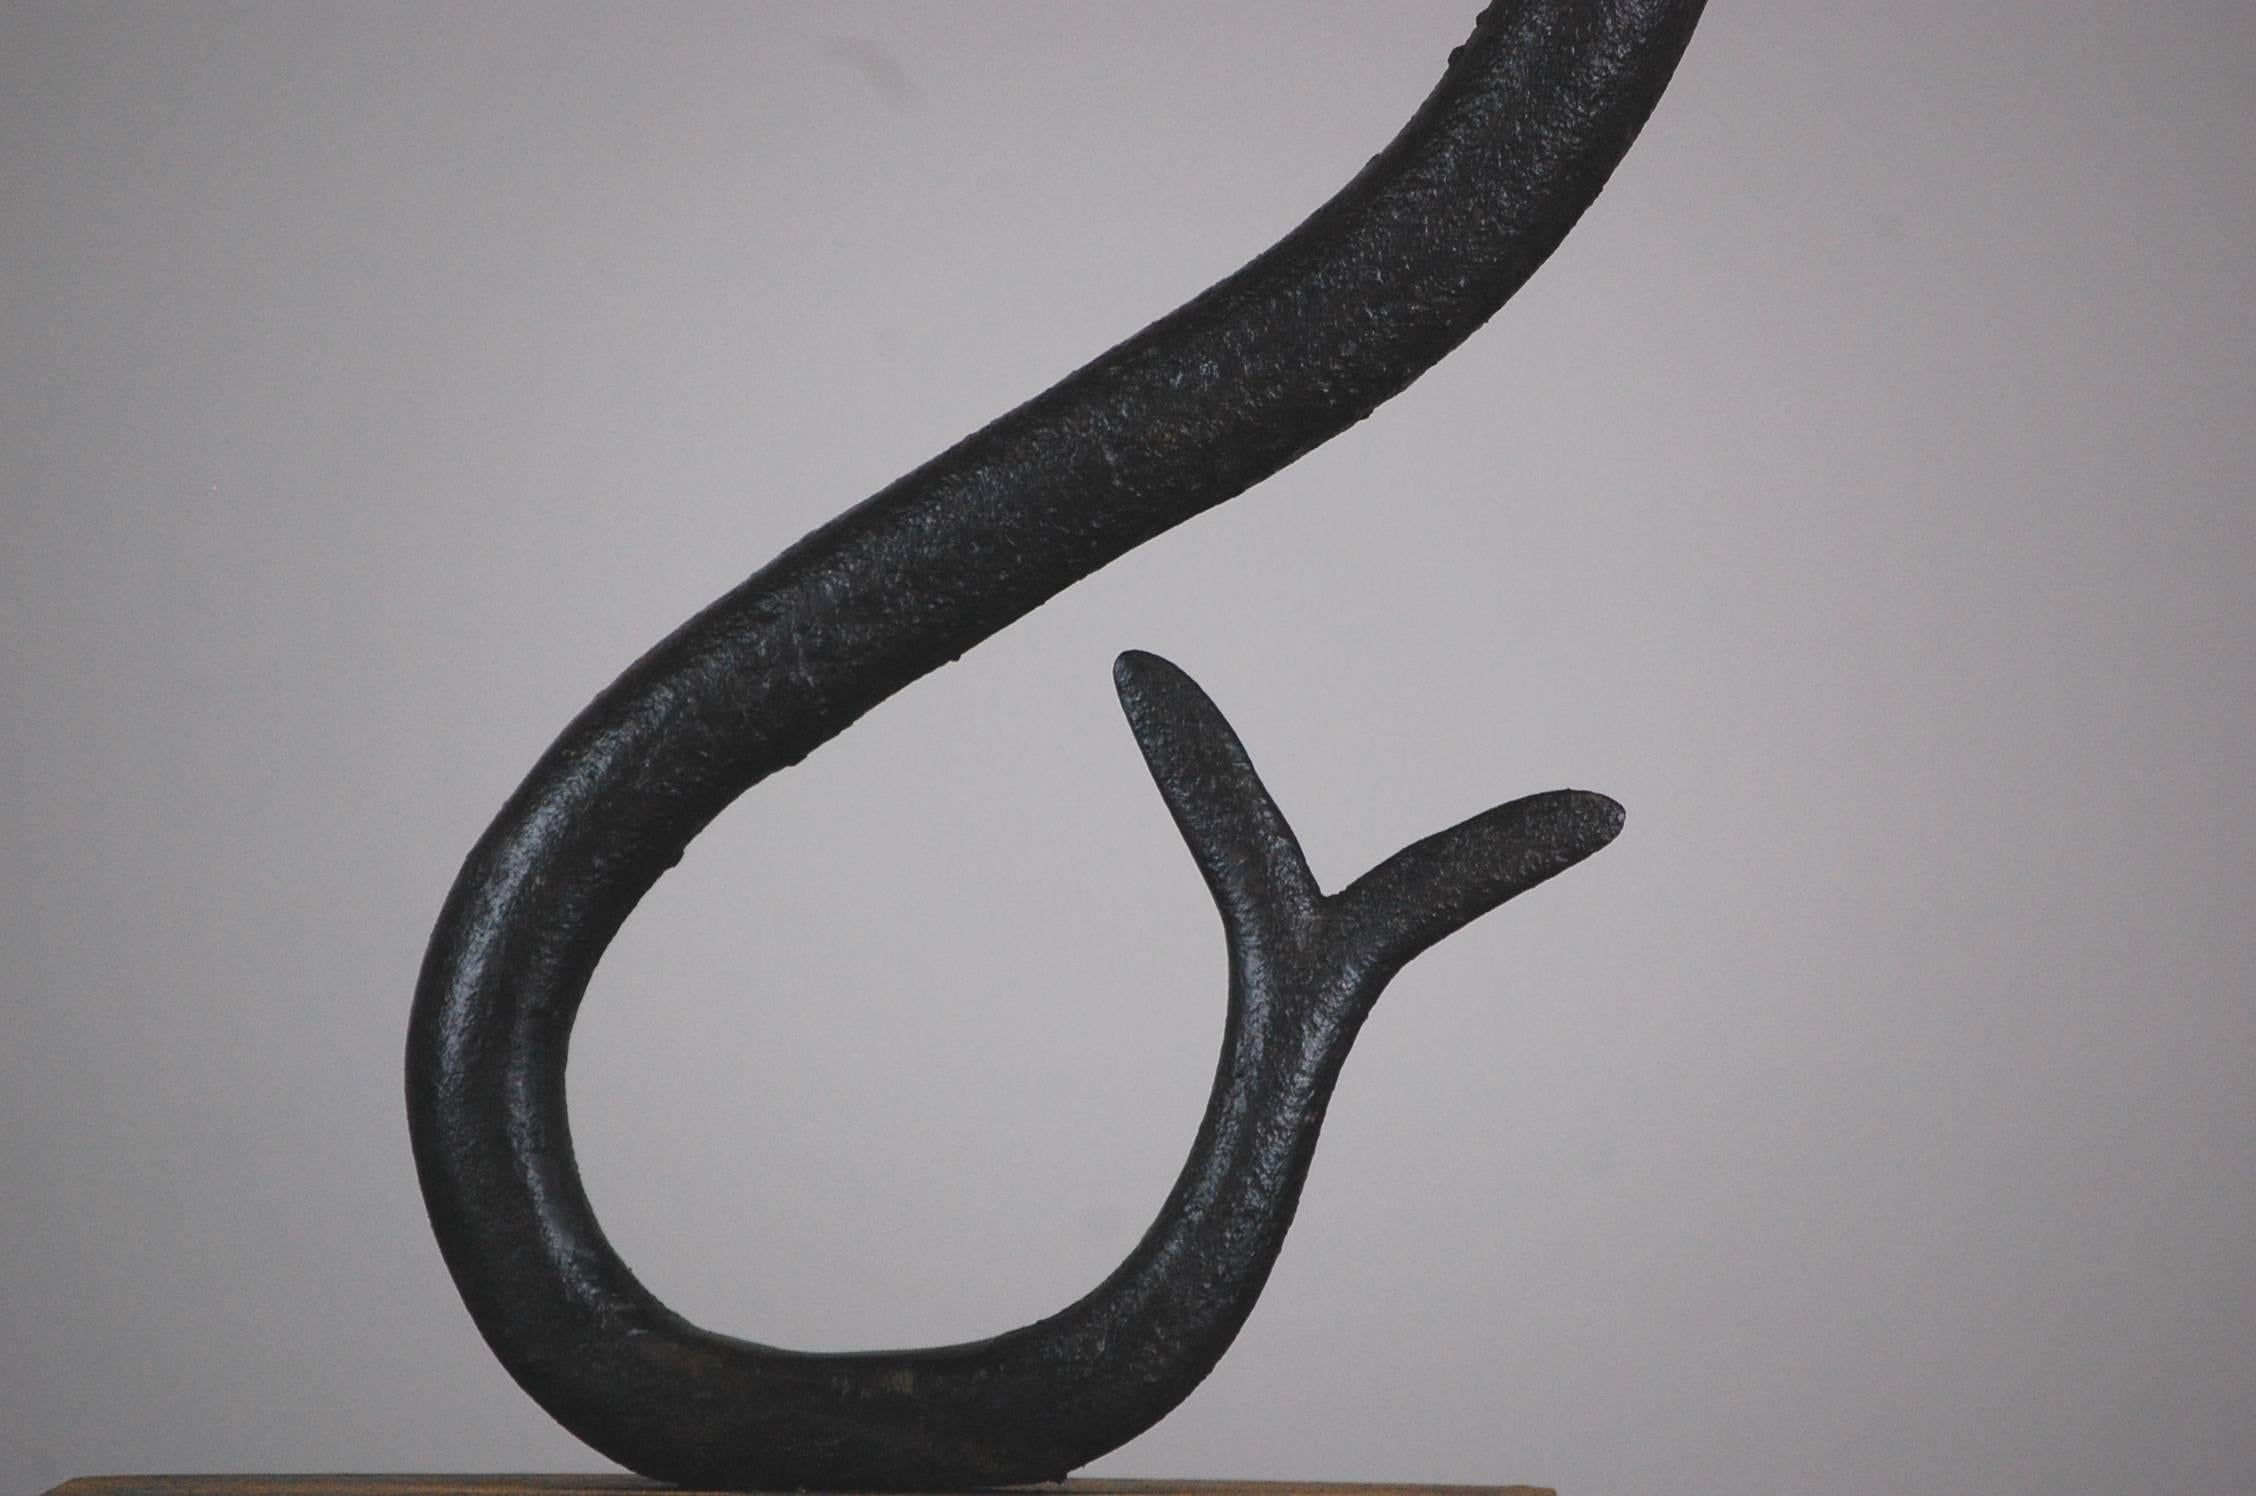 Early 19th century apothecary snake trade sign, although full bodied solid wrought iron, this example creates a wonderful bold Silhouette as required by such early signs. Original wrought iron hanging loop. Wonderful pitted textured surface showing